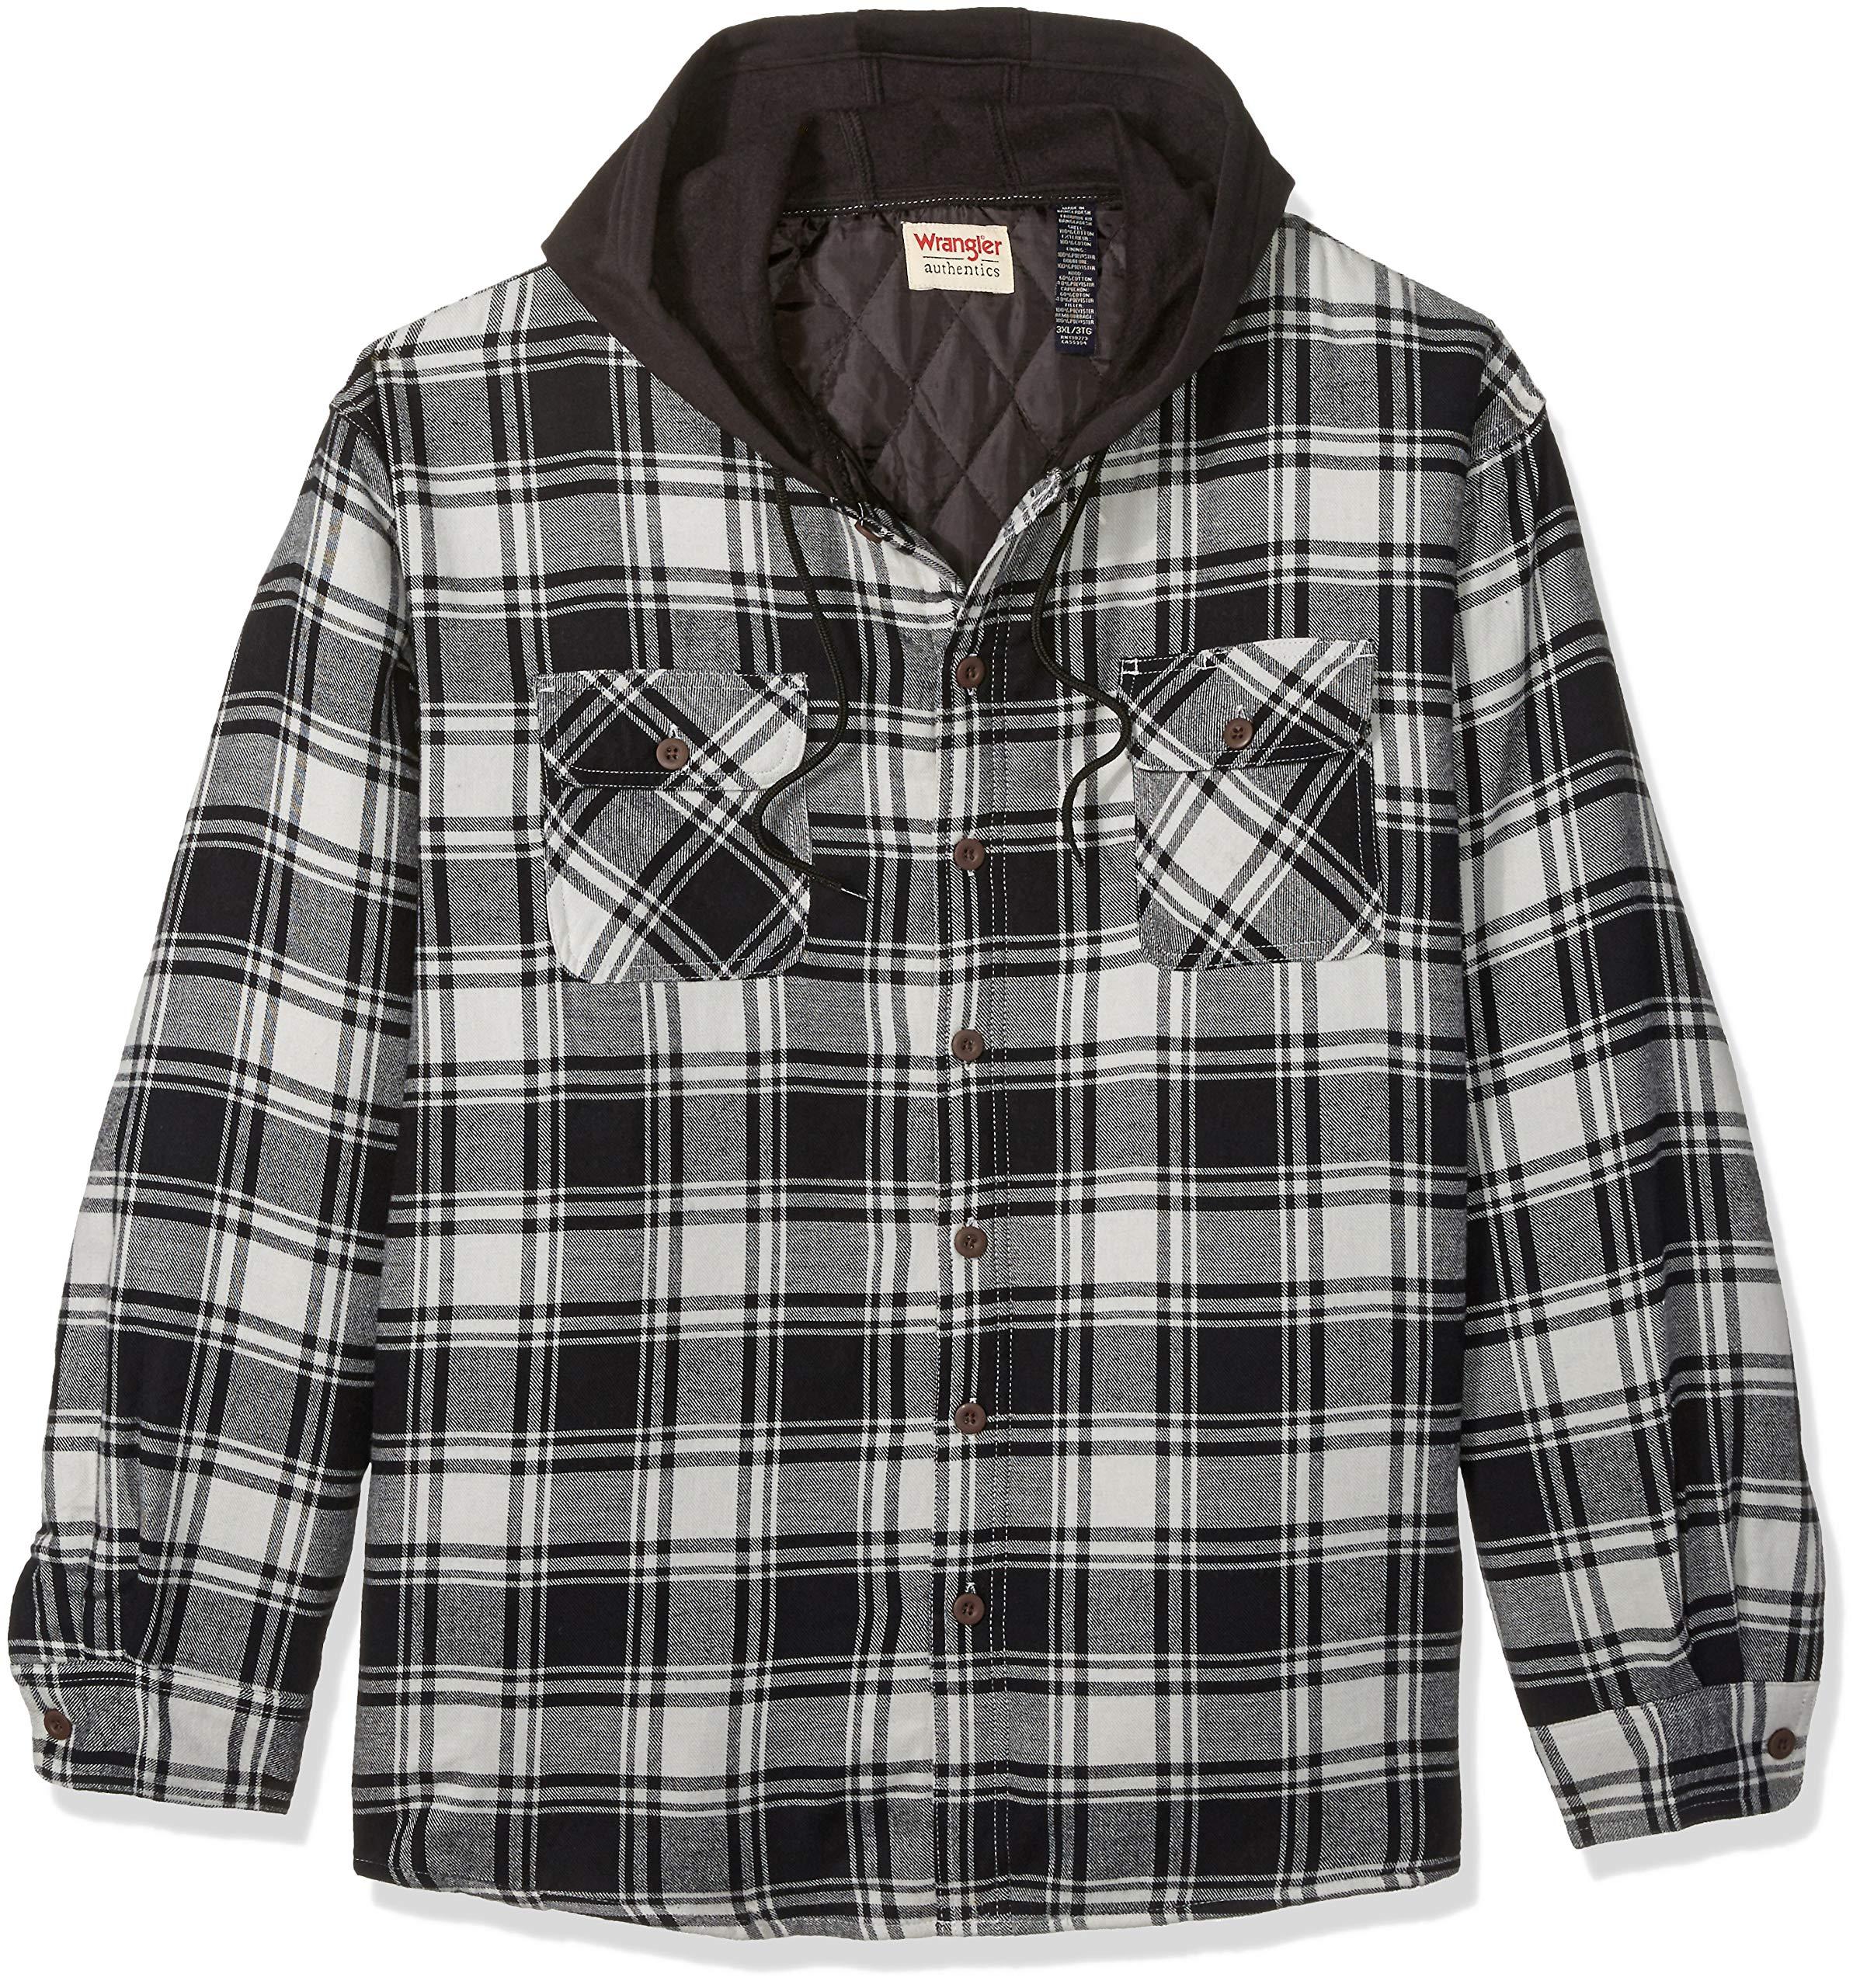 MAGCOMSEN Men's Flannel Shirt Jacket with Hood Long Sleeve Quilted Lined Plaid Coat Button Down Thick Hoodie Outwear Winter 